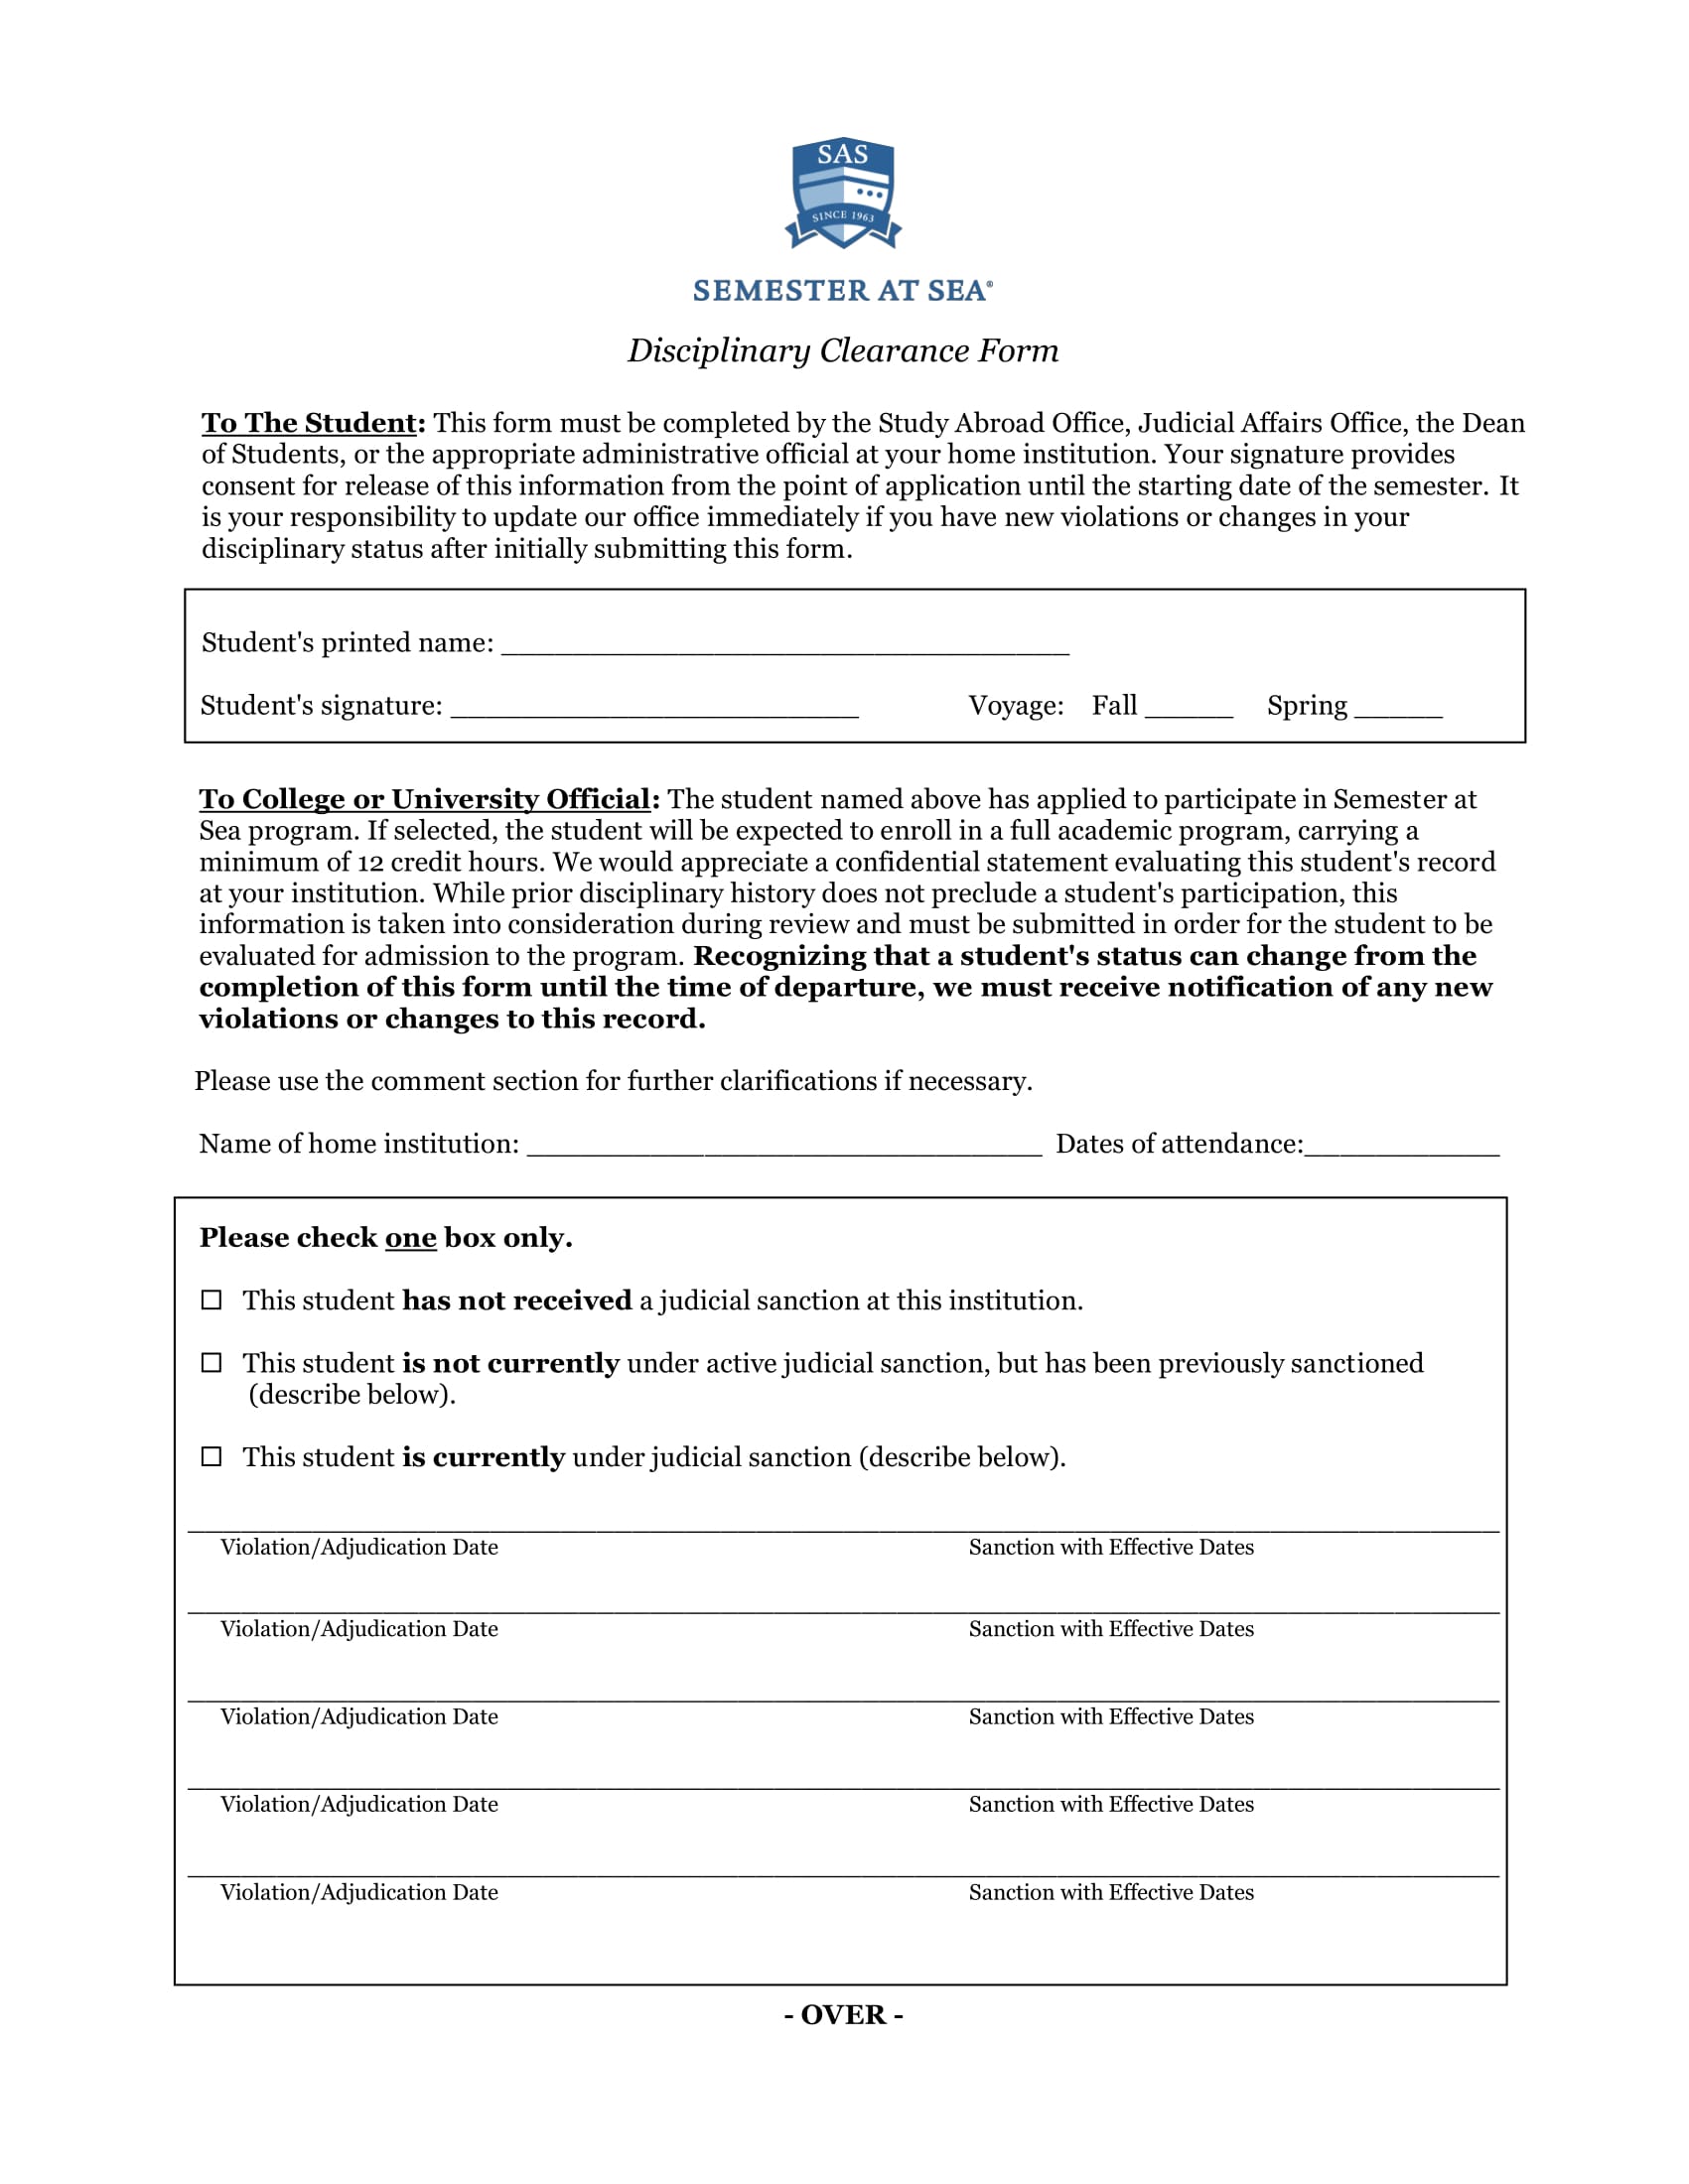 student disciplinary clearance form 1